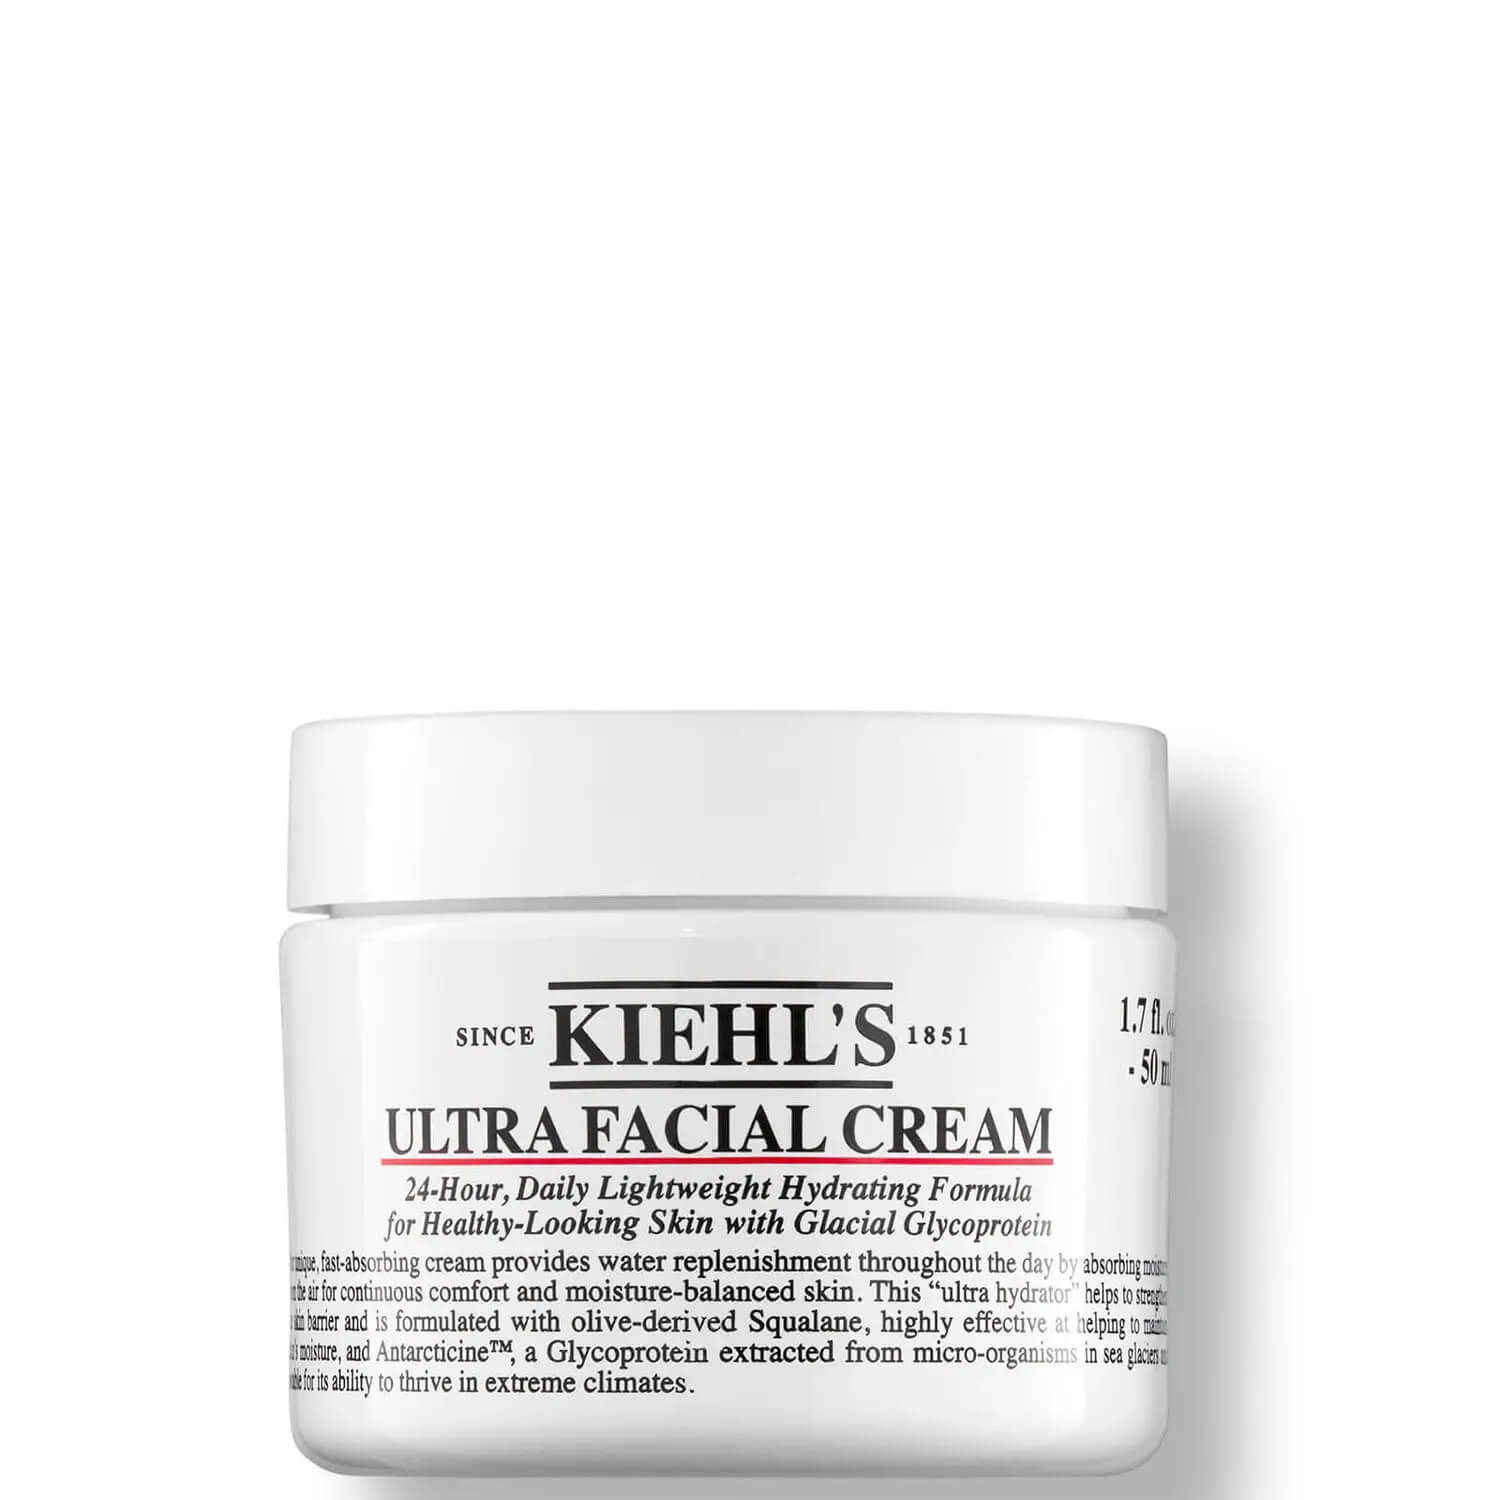  wa KIEHL'S ULTRA FACIAL CREAM 24-Hour, Daily Lightweight Hydrating Formula for Healthy-Looking Skin with Glacial Glycoprotein i fitabsorbing cream provides water replenishment throughout the day absorbinng tkirforcontinuous comfort and moisture-balanced skin. This ultra hydrato: helpstostege ehaer and is formulated with olive-derived Squalane, highly effective helping iy iminwe, and Antarcticine, a Glycoprotein extracted from micro-organisi: in sea g Ririsabiit to thrive in extreme climates. 